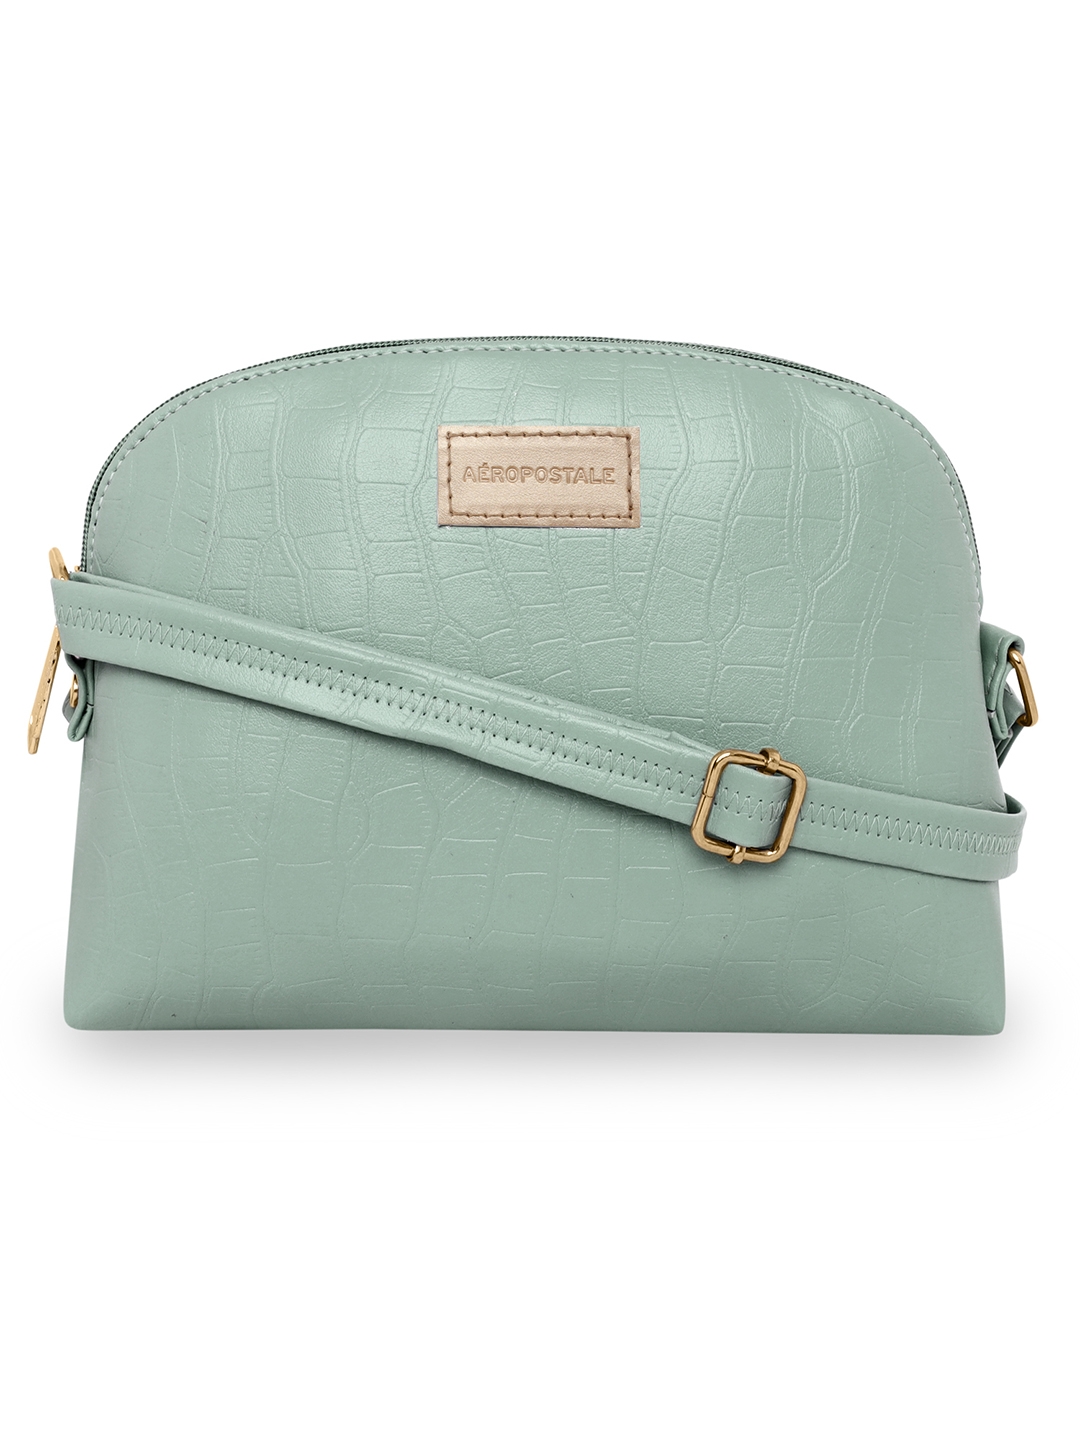 Aeropostale Textured Kylie PU Sling Bag with non-detachable strap (Green)